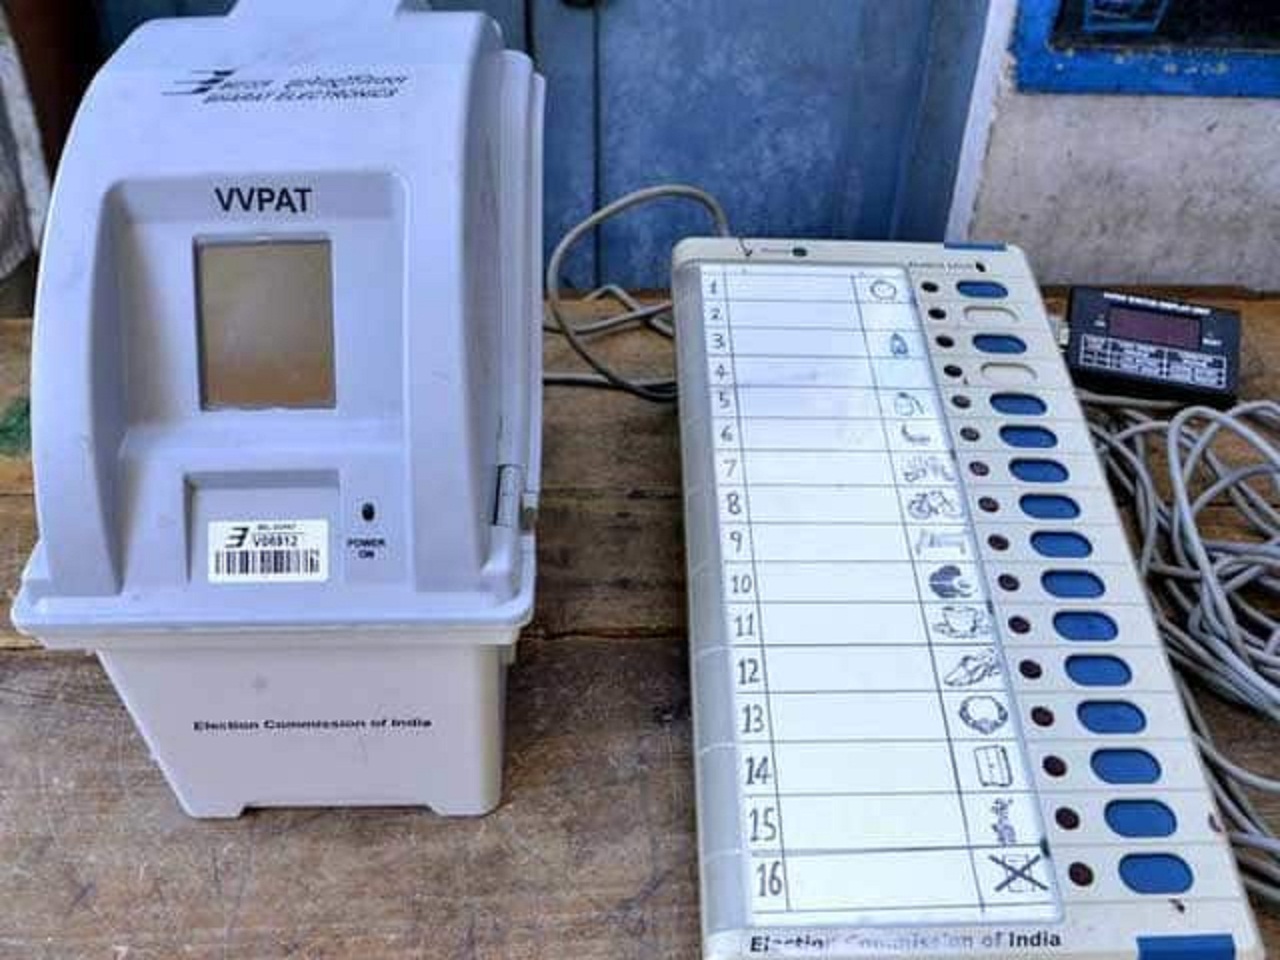 This time, the electronically voting machine will show the candidates' photos